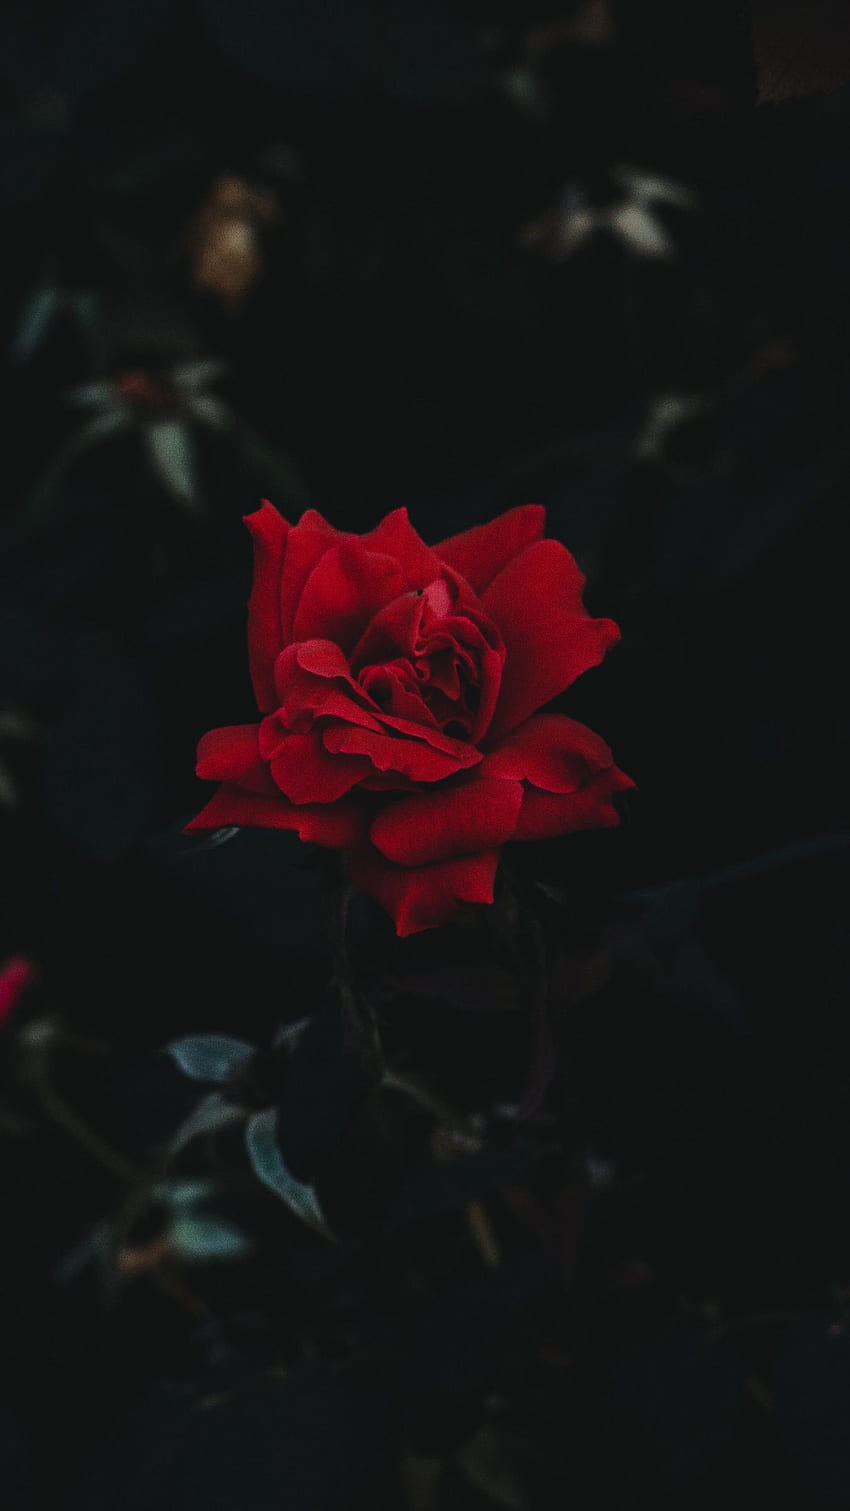 Browse Free HD Images of A Red Flower Against A Blurry Bokeh Background